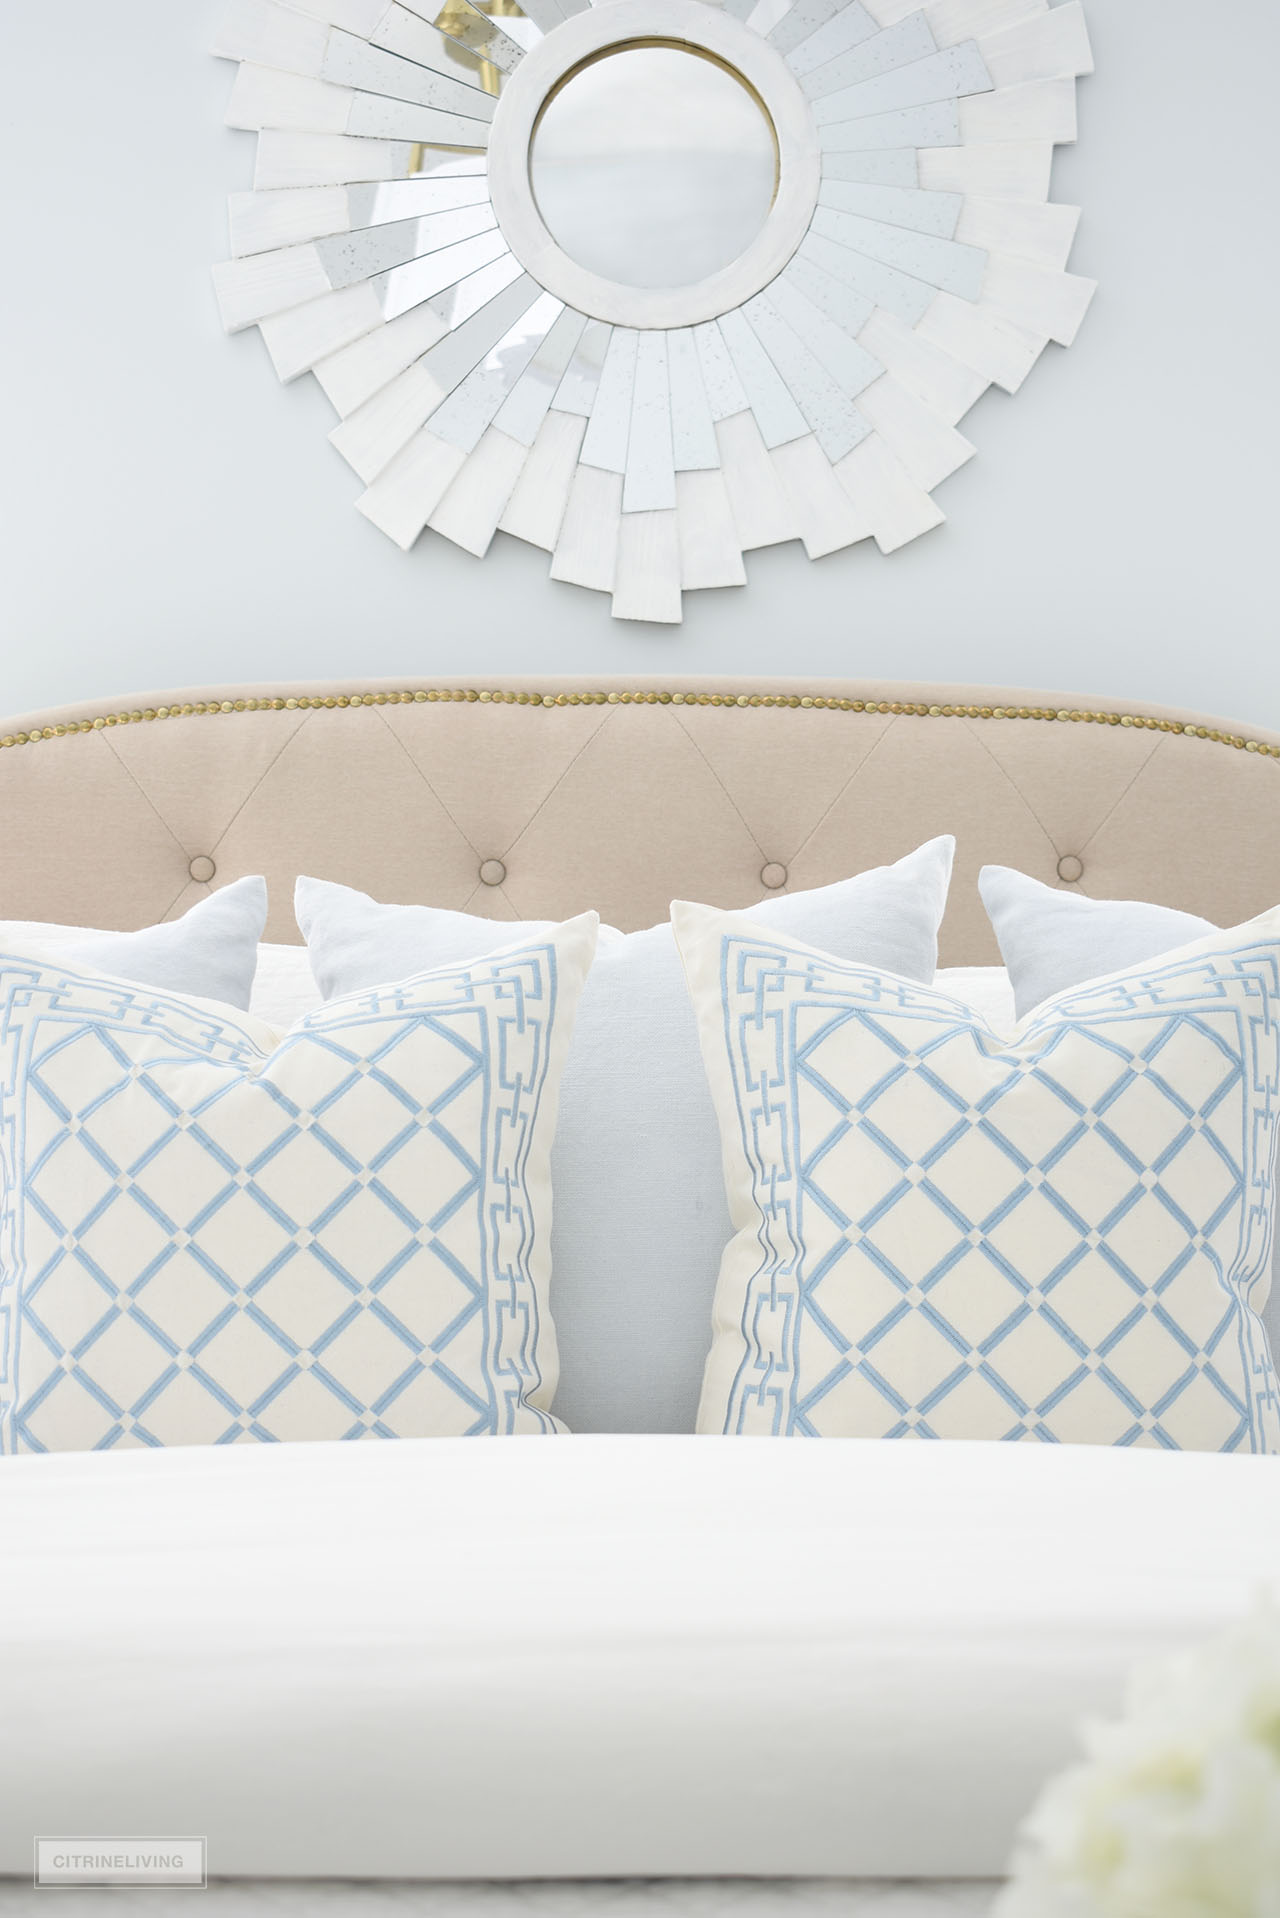 Chic throw pillows in a light blue and white diamond pattern, styled with pretty light blue linen pillows and quilted bedding.